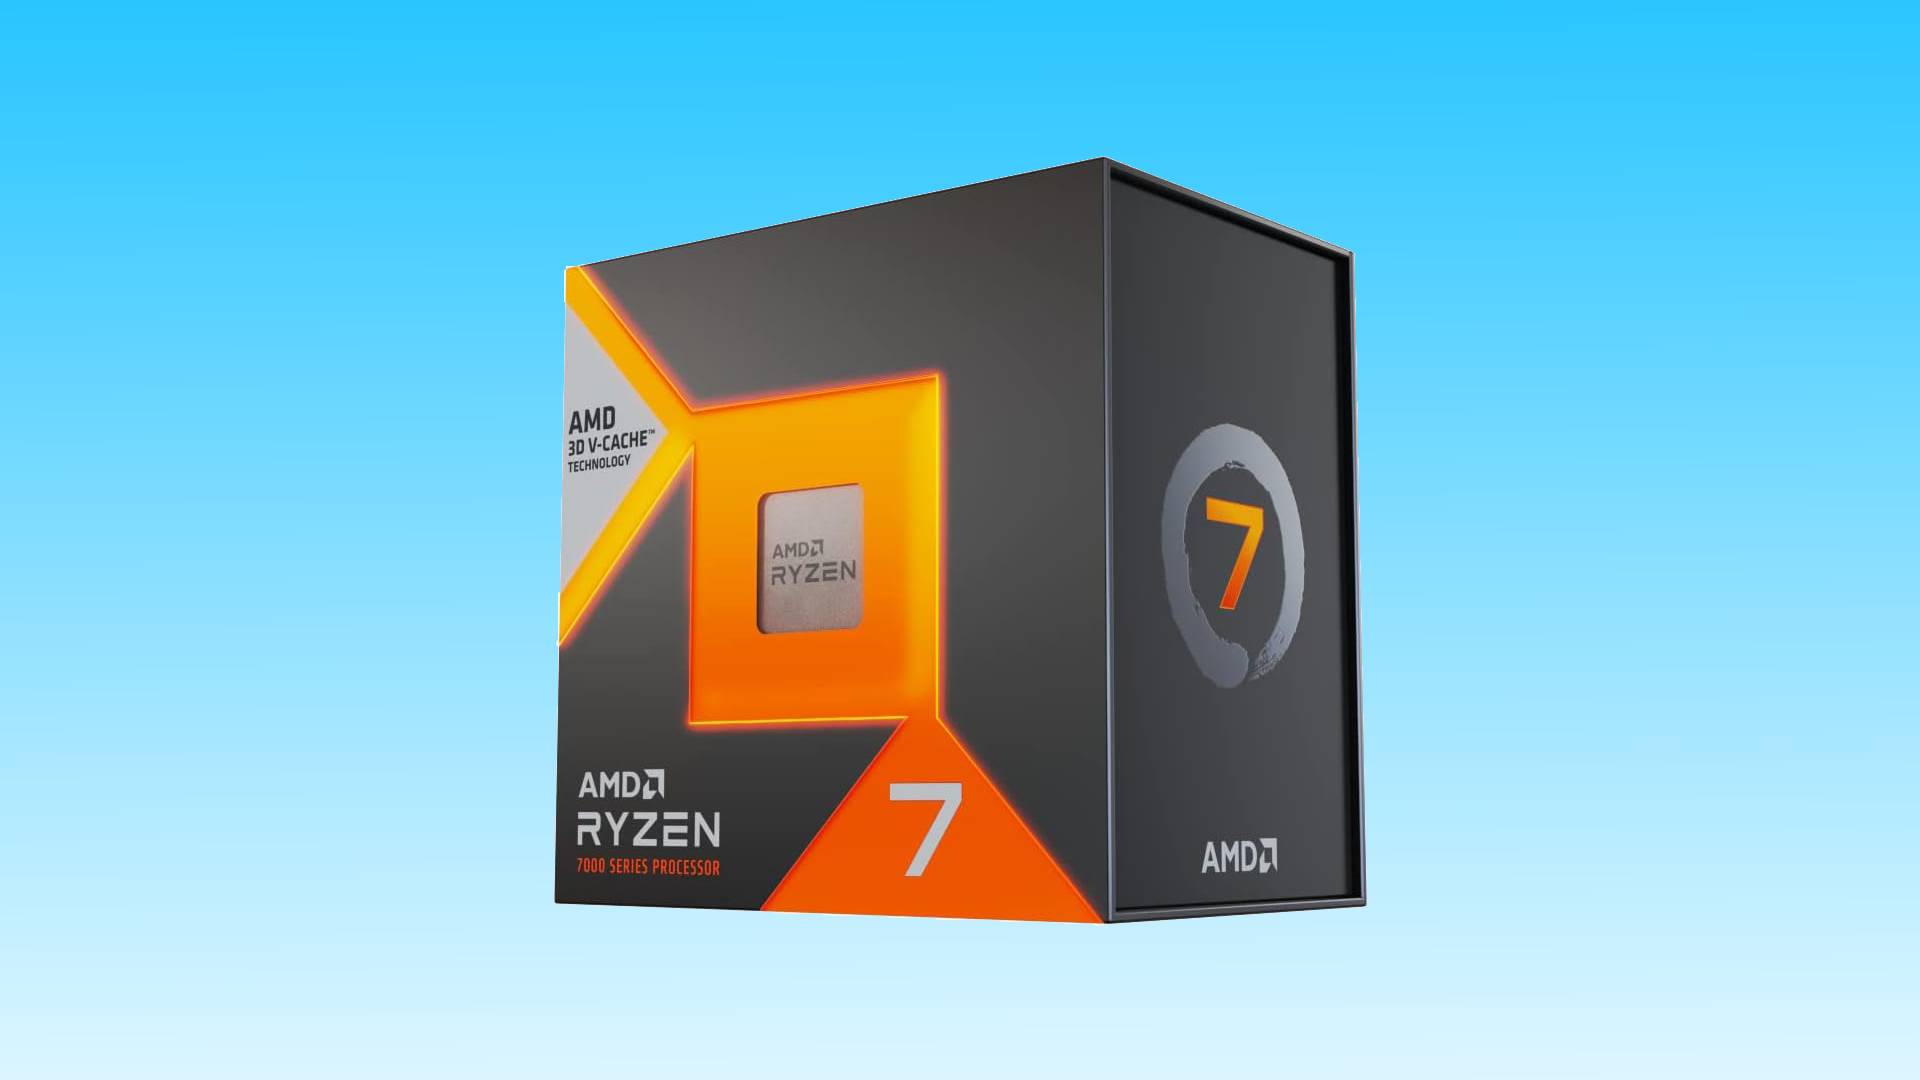 AMD Ryzen 7 7800X3D processor box displaying the logo and branding on a blue gradient background.